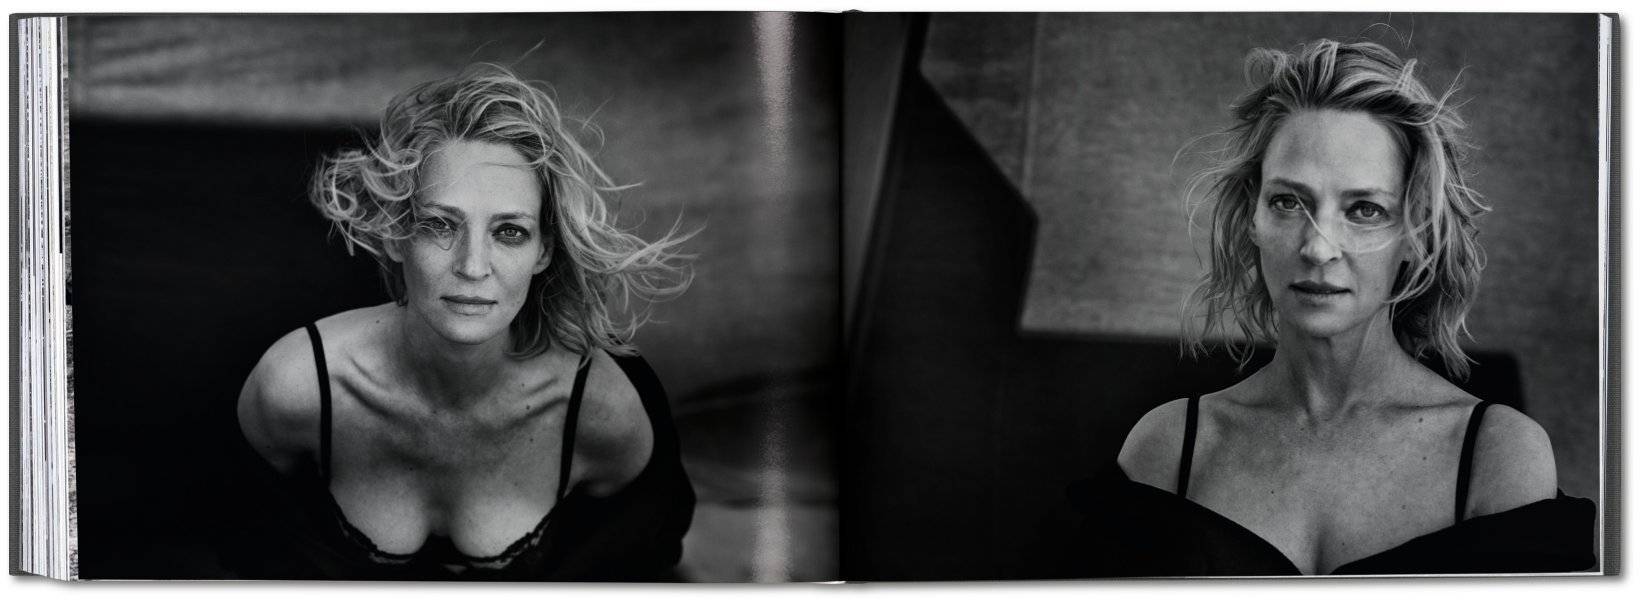 “Shadows on the Wall” : les actrices sous l’objectif de Peter Lindbergh